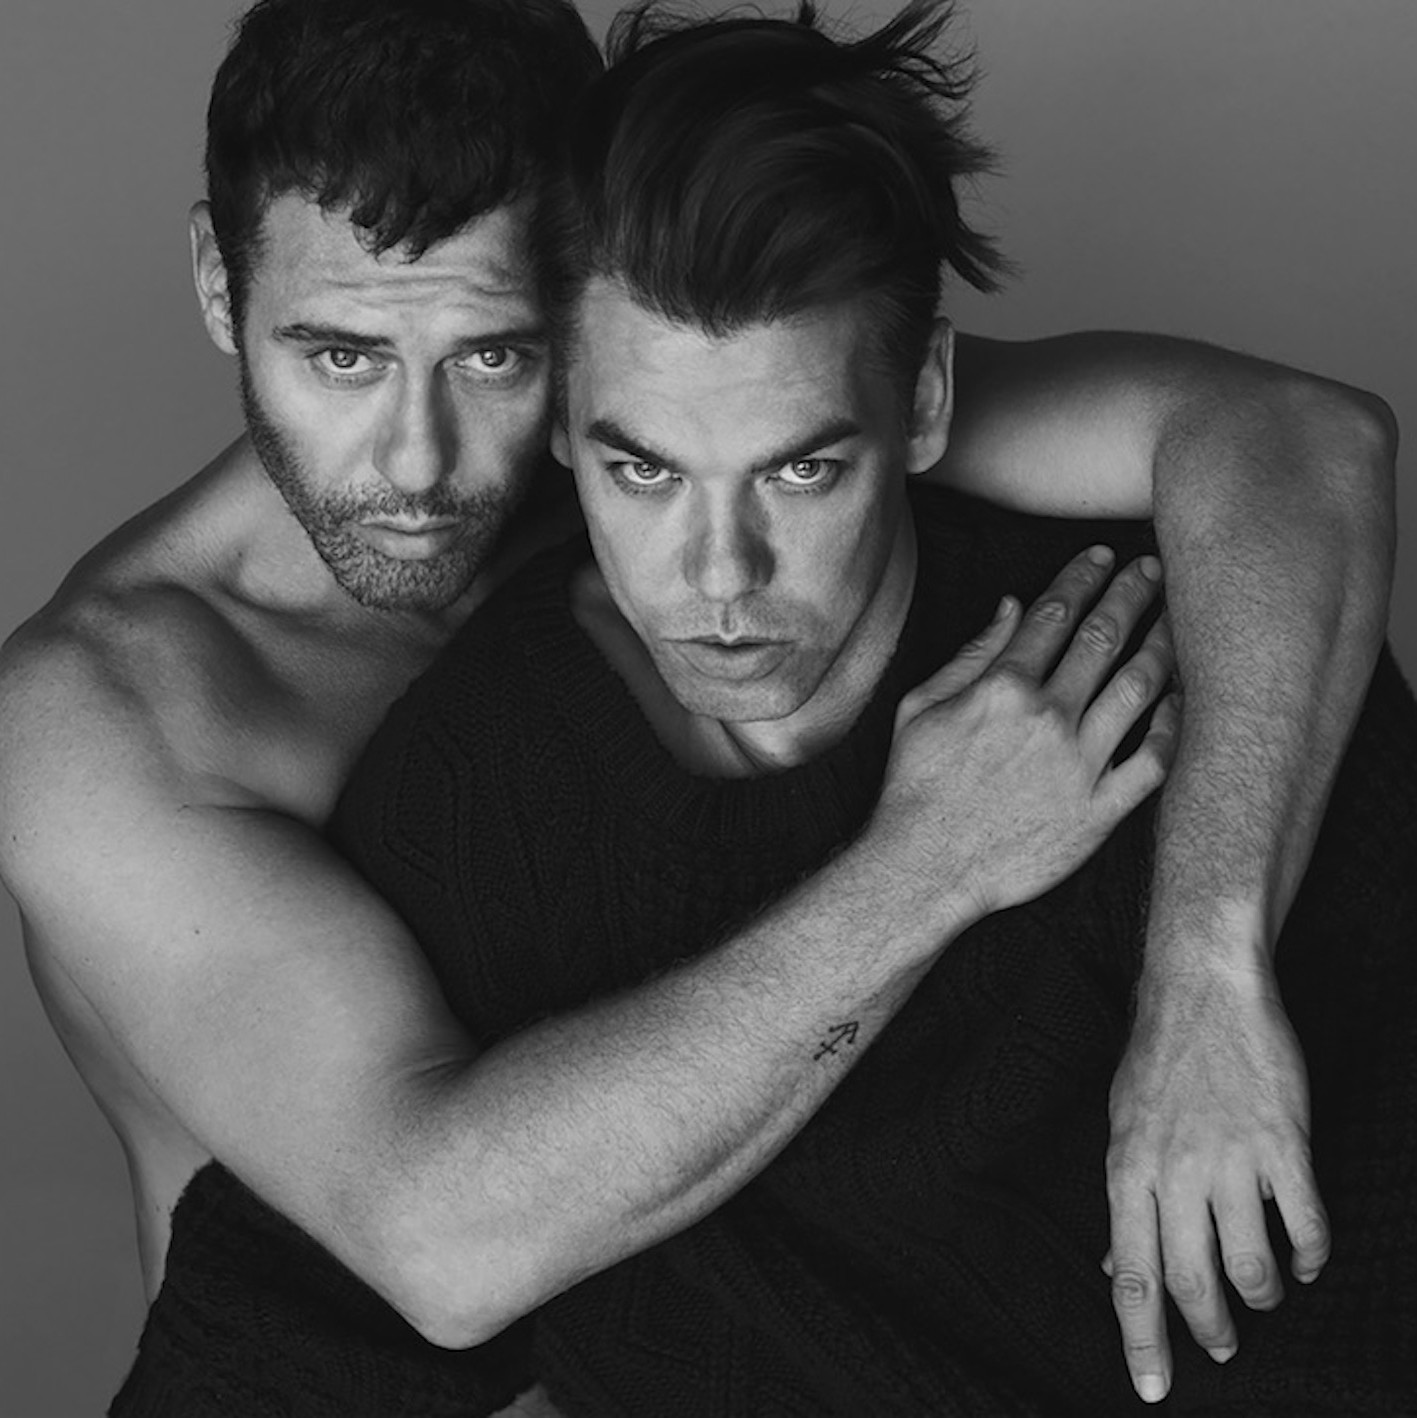 Mert and Marcus: "It's the most important time to feel inspired"